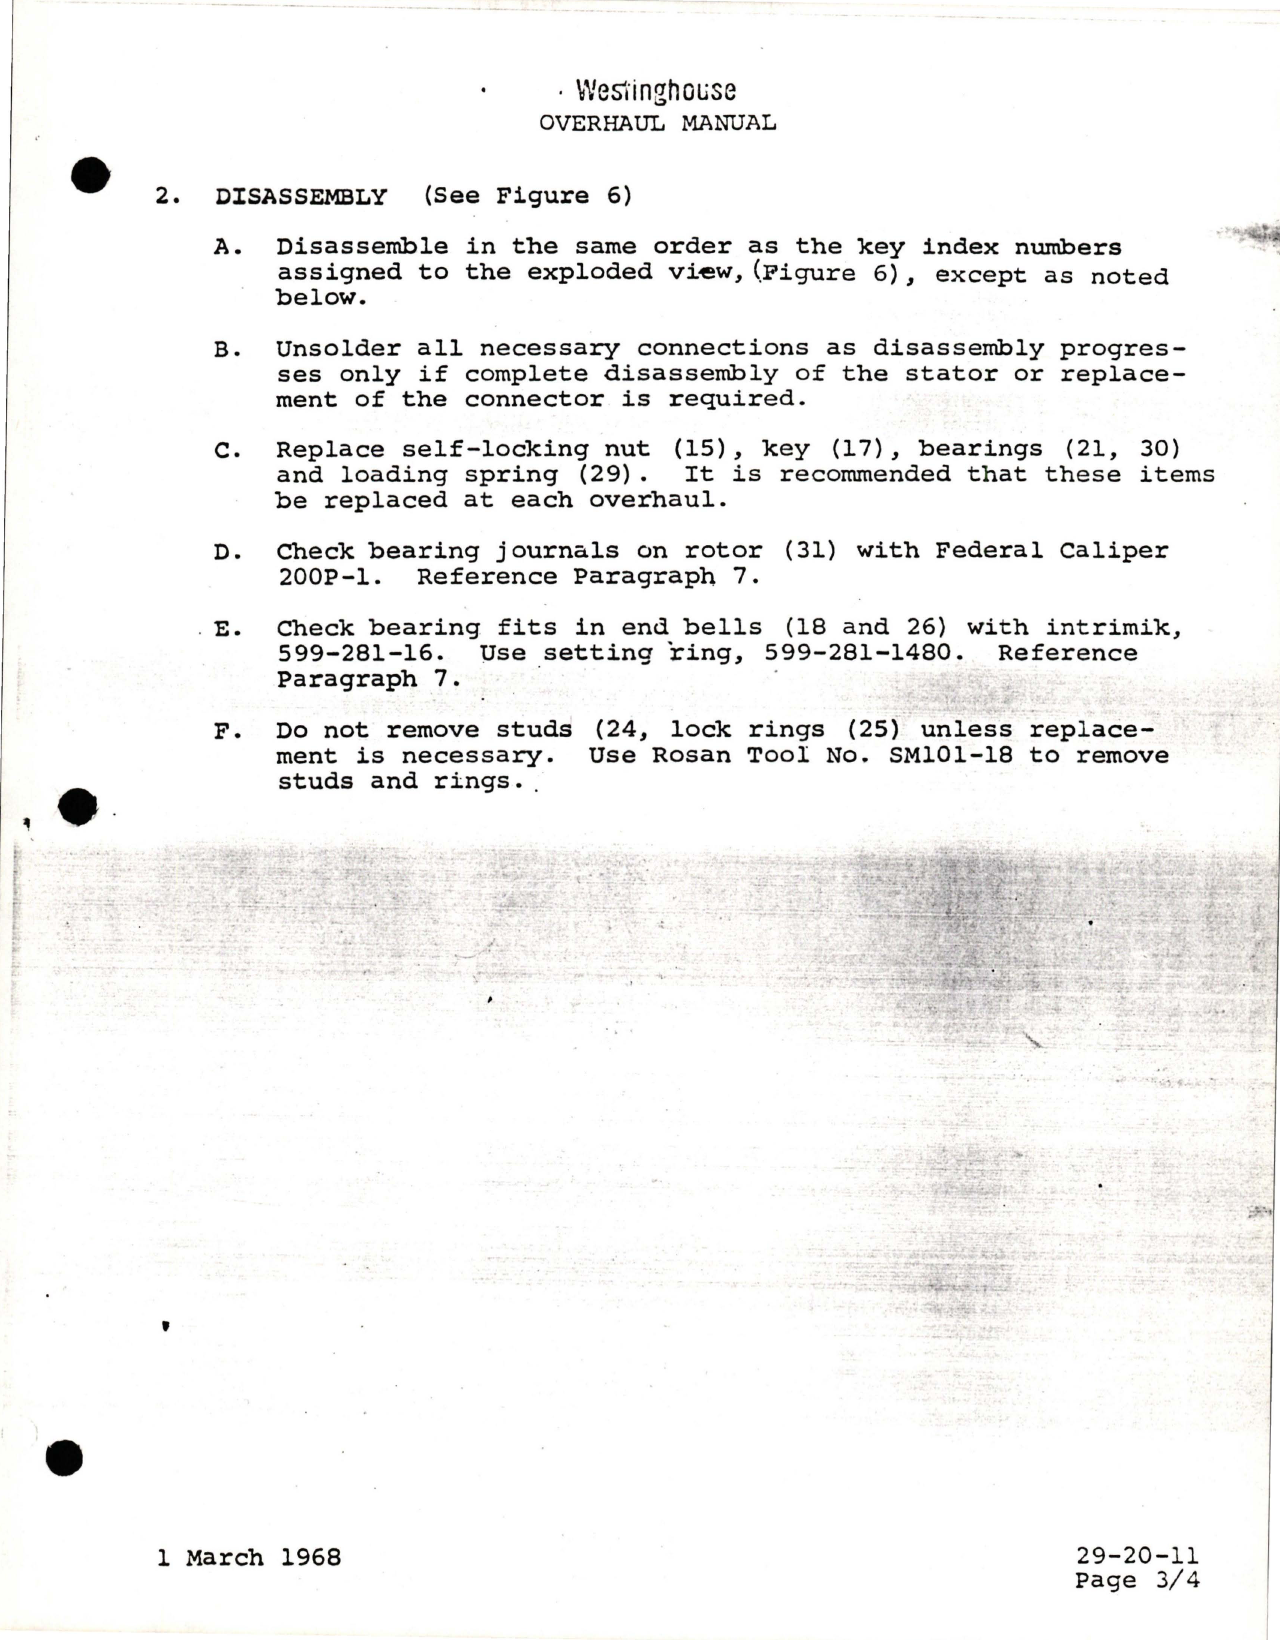 Sample page 7 from AirCorps Library document: Overhaul Manual for AC Motor - Parts 939D228-2 and 939D228-4